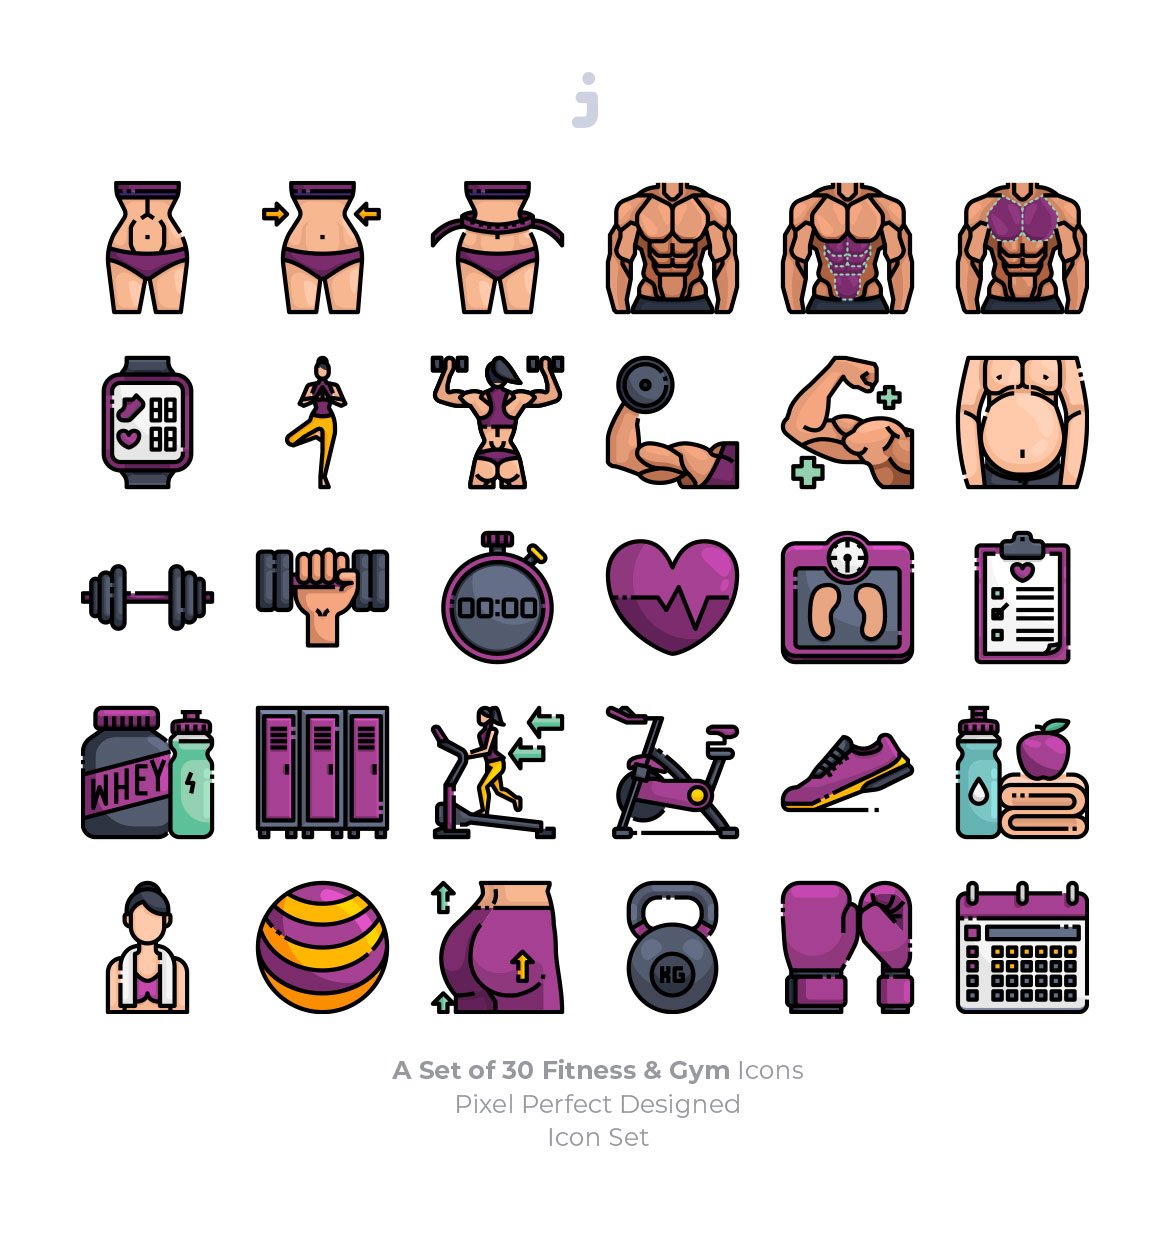 30 Fitness & Gym Icon set preview image.